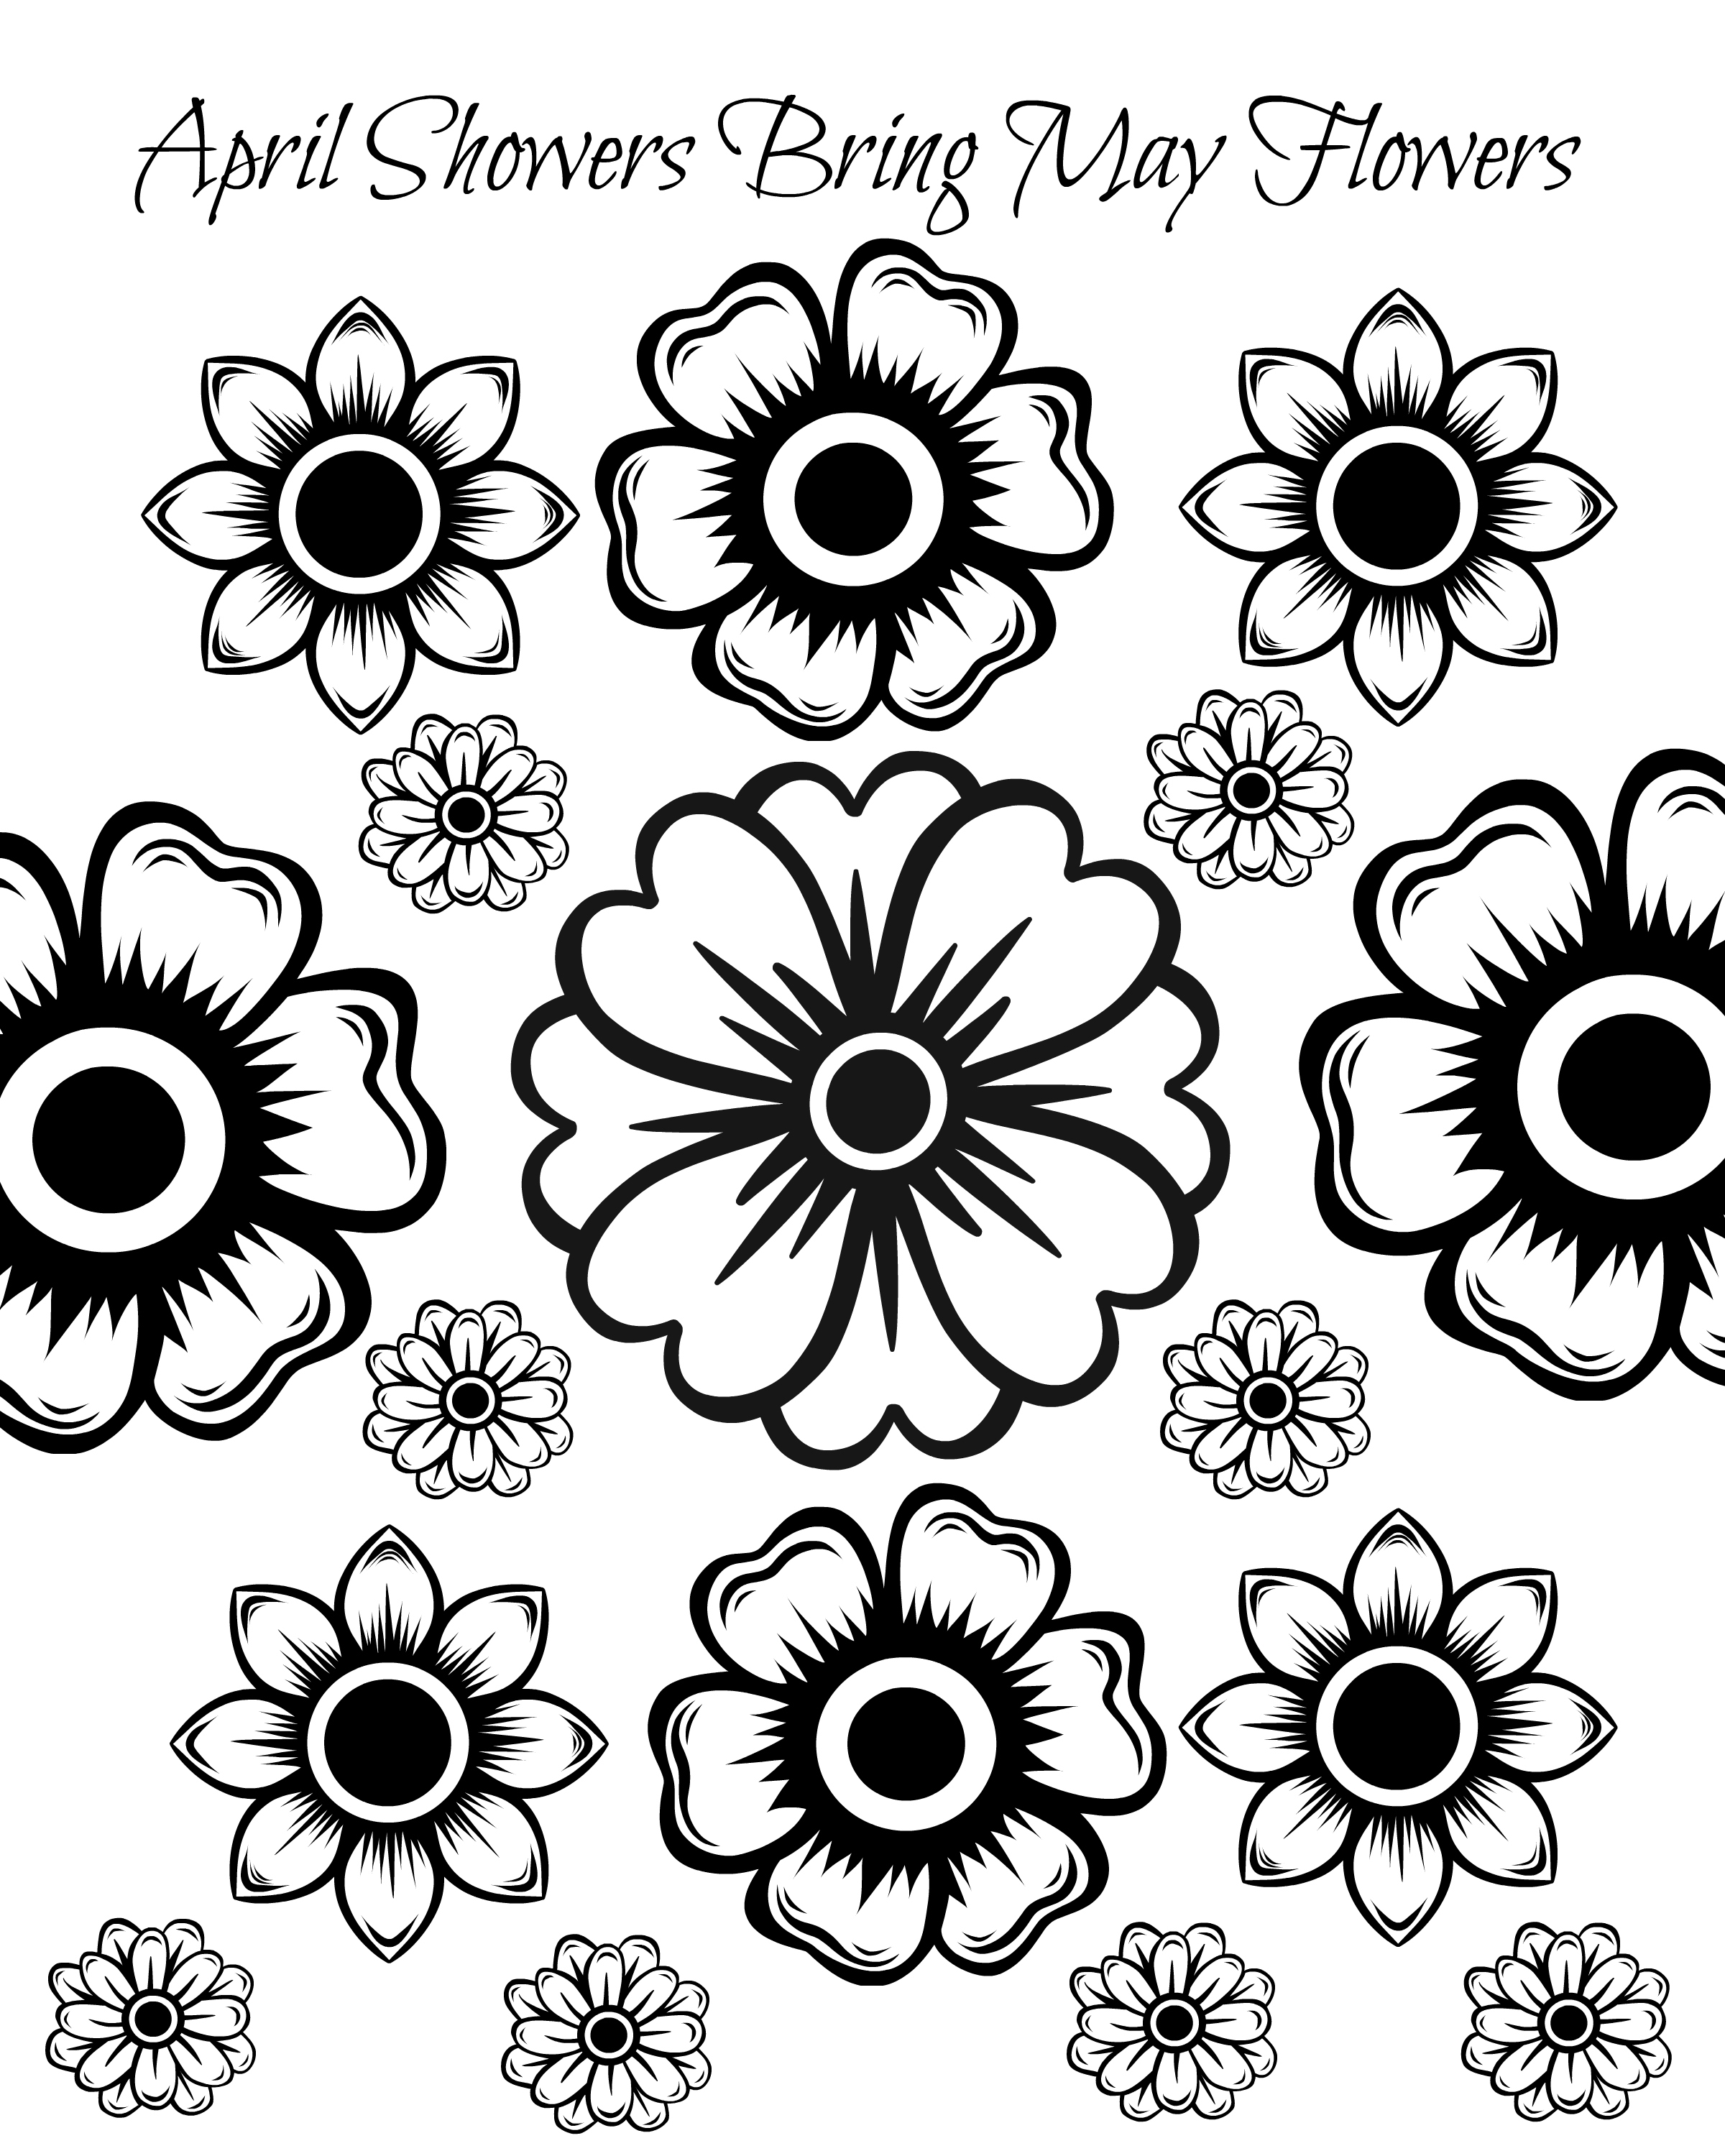 April Showers Bring May Flowers Coloring Page at ...